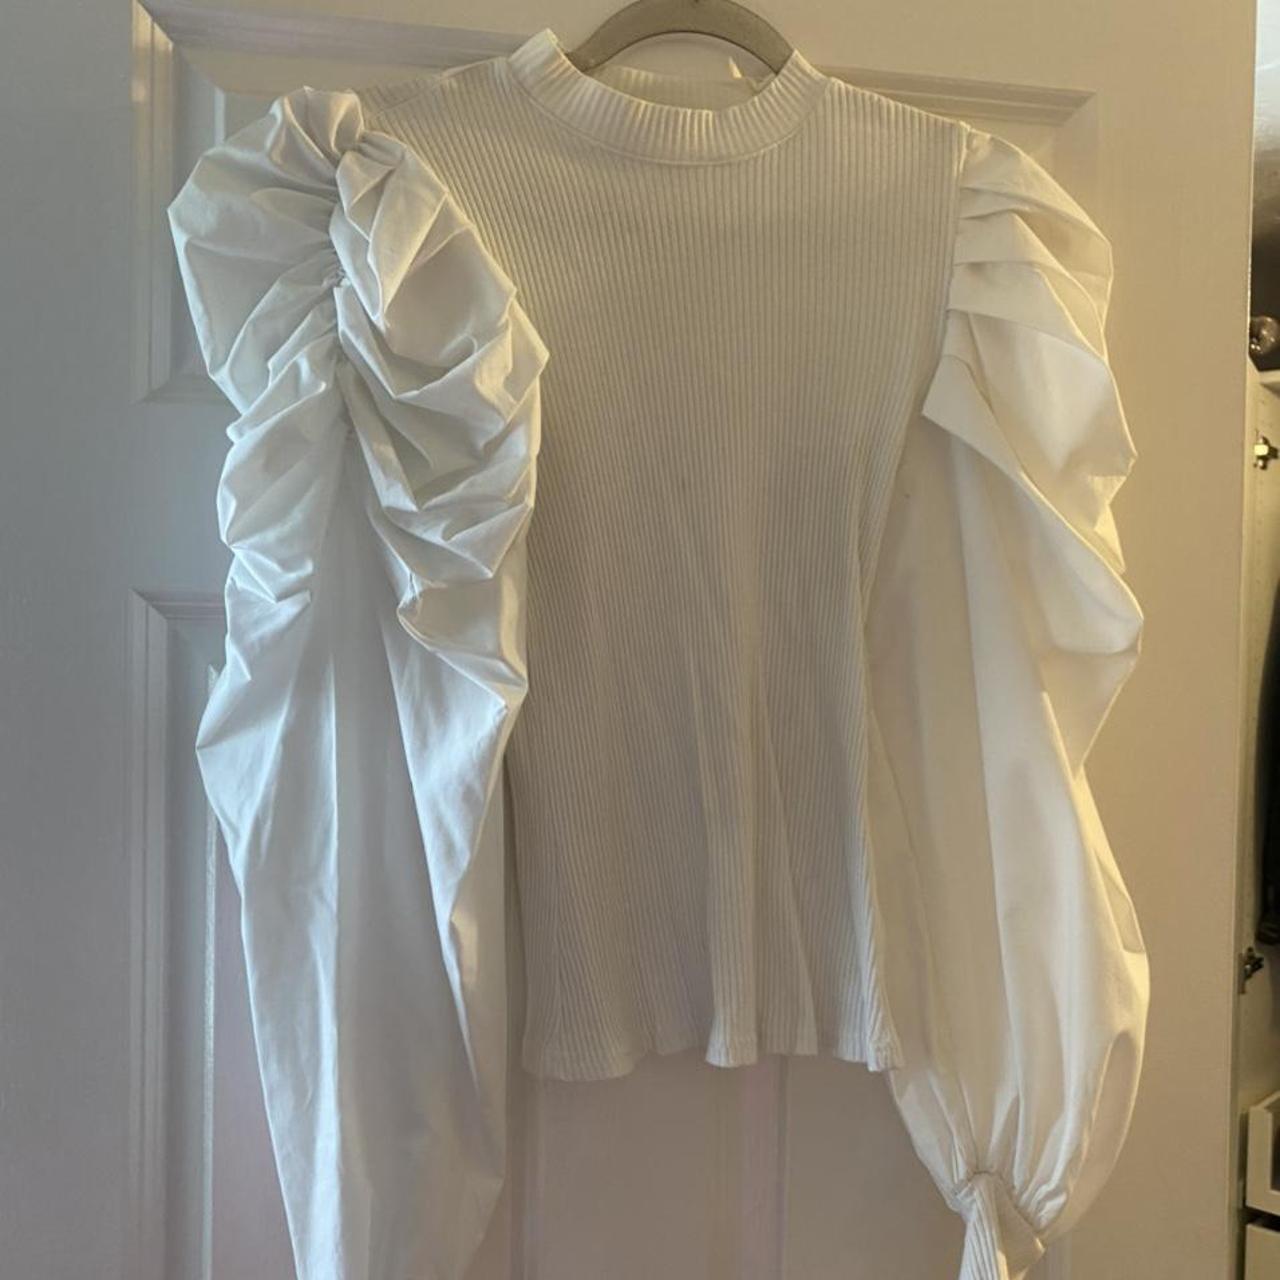 white top with puffy shoulders & arms runs very small - Depop